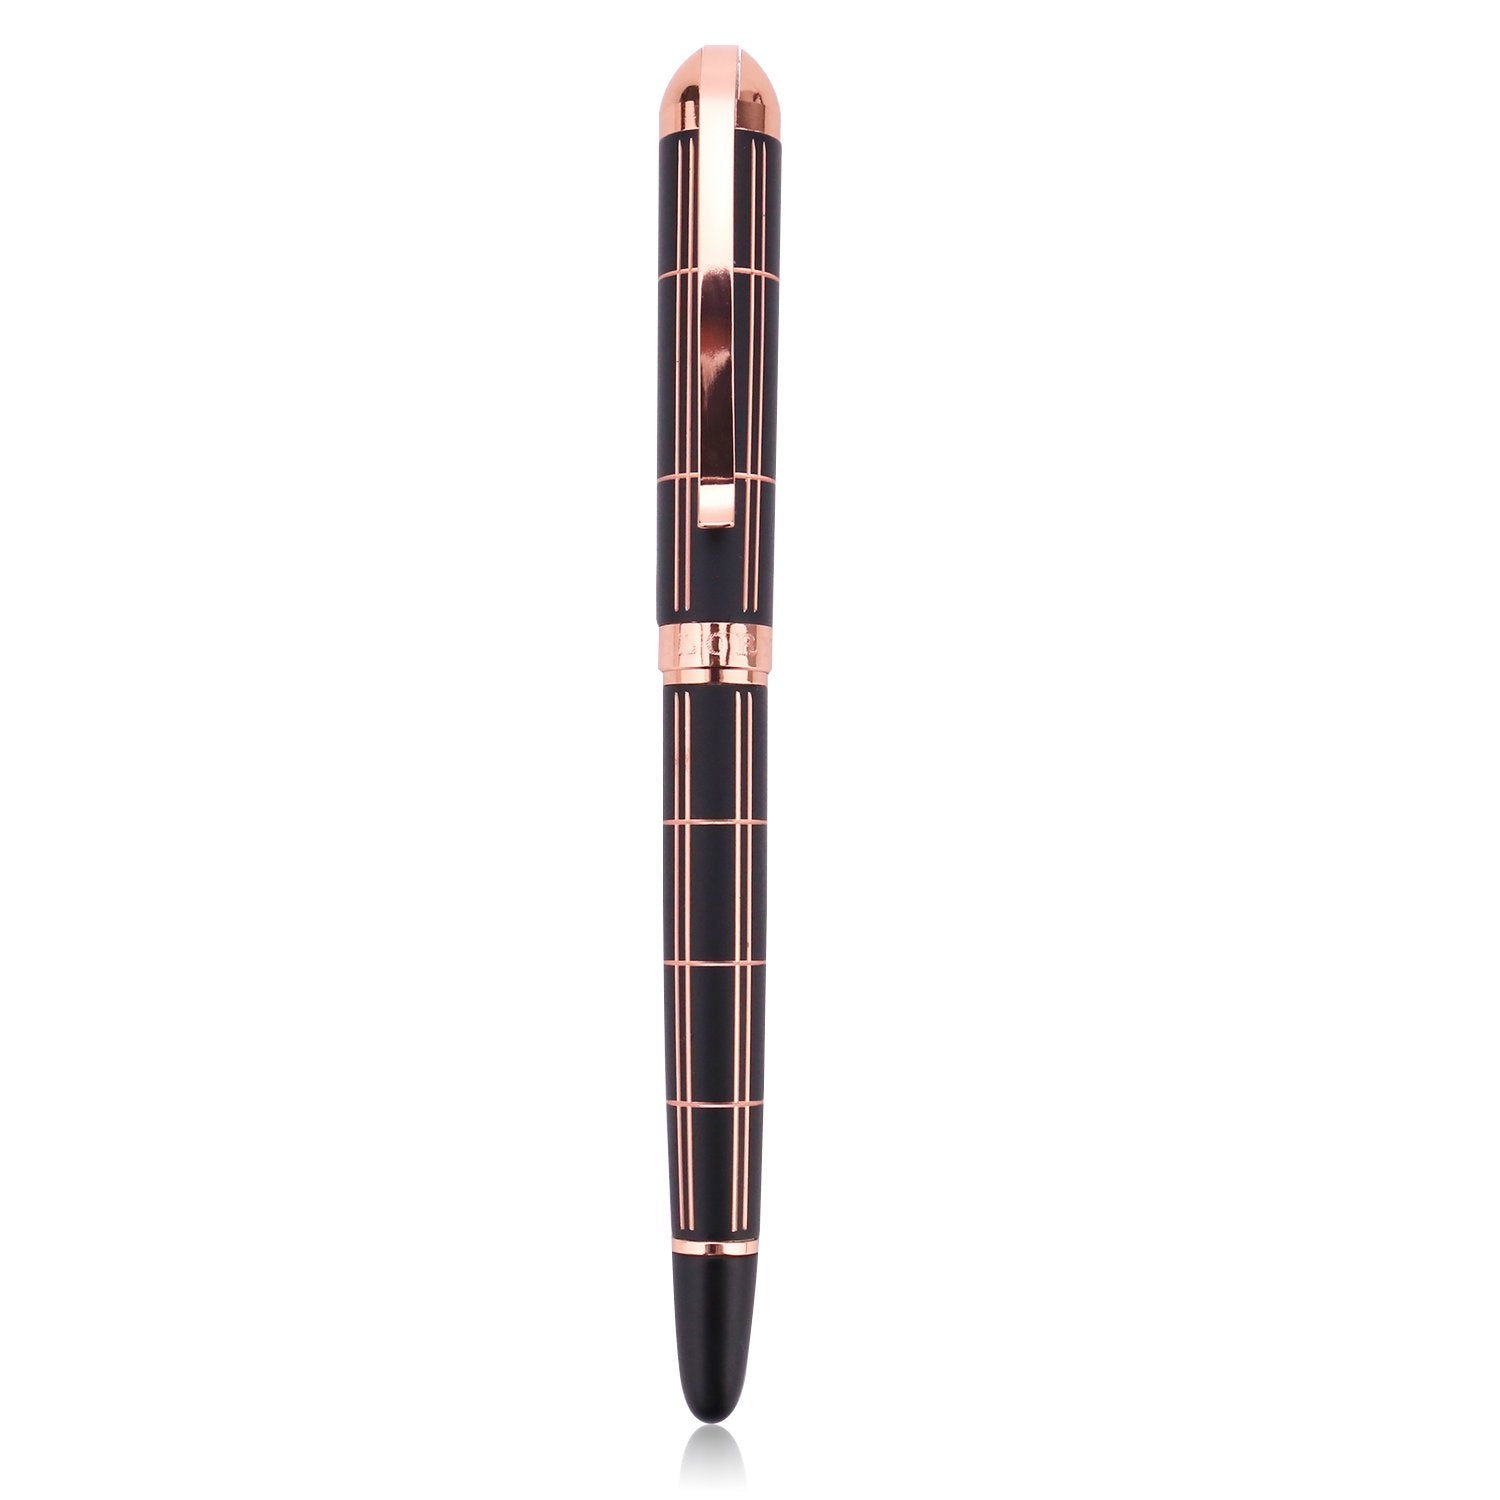 Croton Ballpoint Pen with laser cut grooves in matte black and rose accents - CROTON GROUP